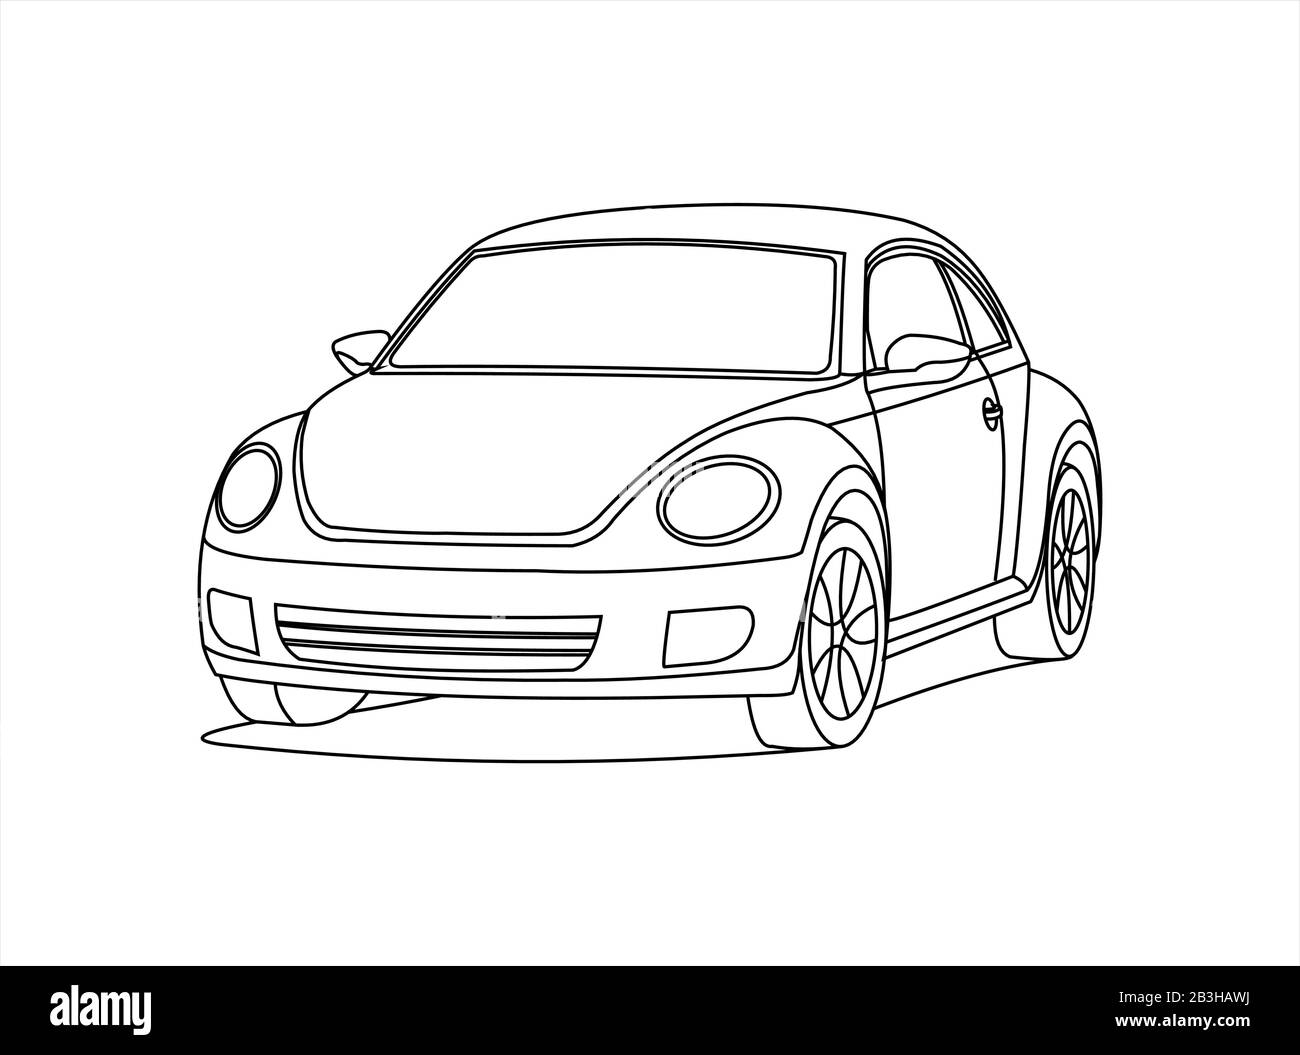 Small Car, Front view, Three quarter view. Contour Image Of A Rounded Car. Compact City Car. Coloring Book Page. Vector Image Isolated On a White Back Stock Vector